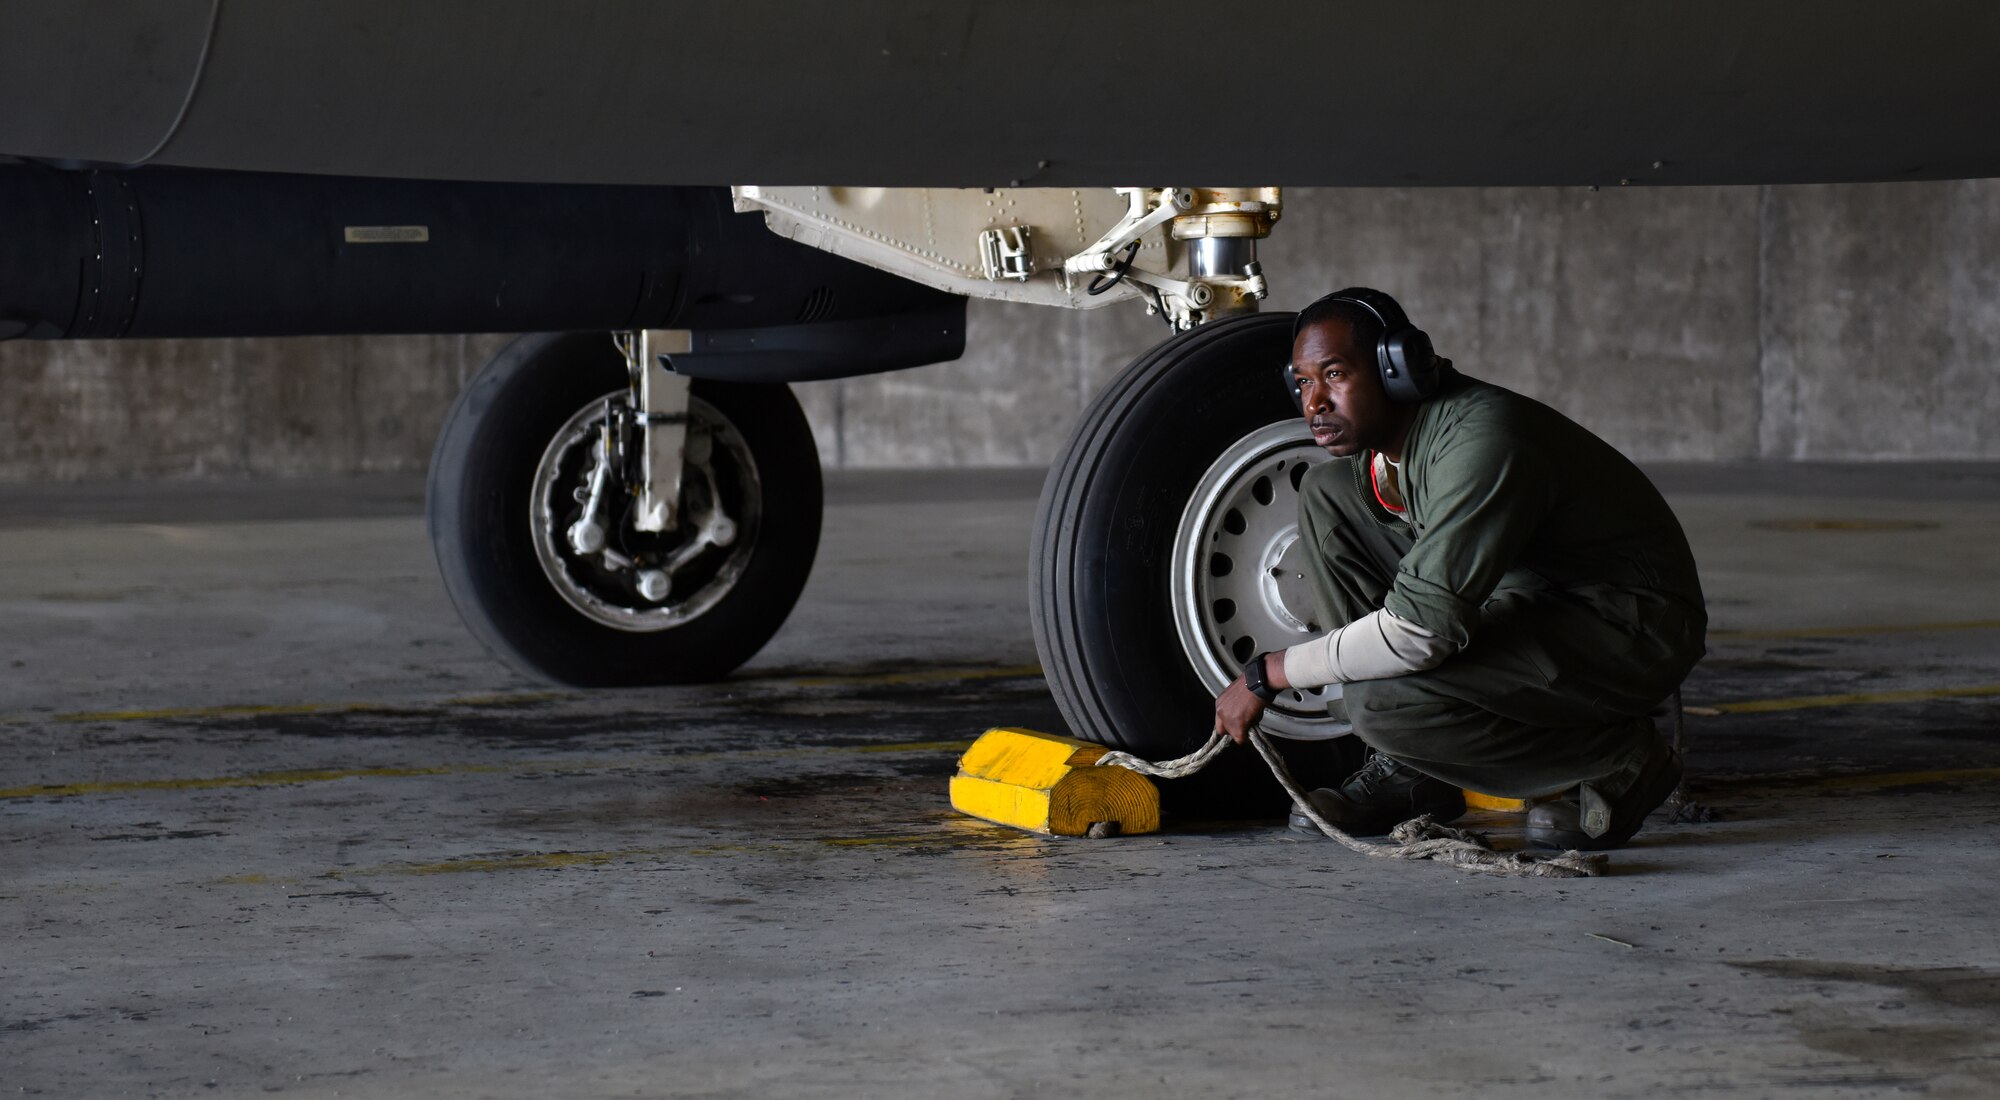 An Airman assigned to the 748th Aircraft Maintenance Squadron prepares to pull the chocks from an F-15C Eagle at Keflavik Air Base, Iceland, Aug. 1, 2018, in support of NATO’s Icelandic Air Surveillance mission. During IAS, the 748th AMXS Airmen are responsible for maintaining the four mission critical F-15s as well as 10 additional jets designated for training. (U.S. Air Force photo/Staff Sgt. Alex Fox Echols III) (U.S. Air Force photo/Staff Sgt. Alex Fox Echols III)